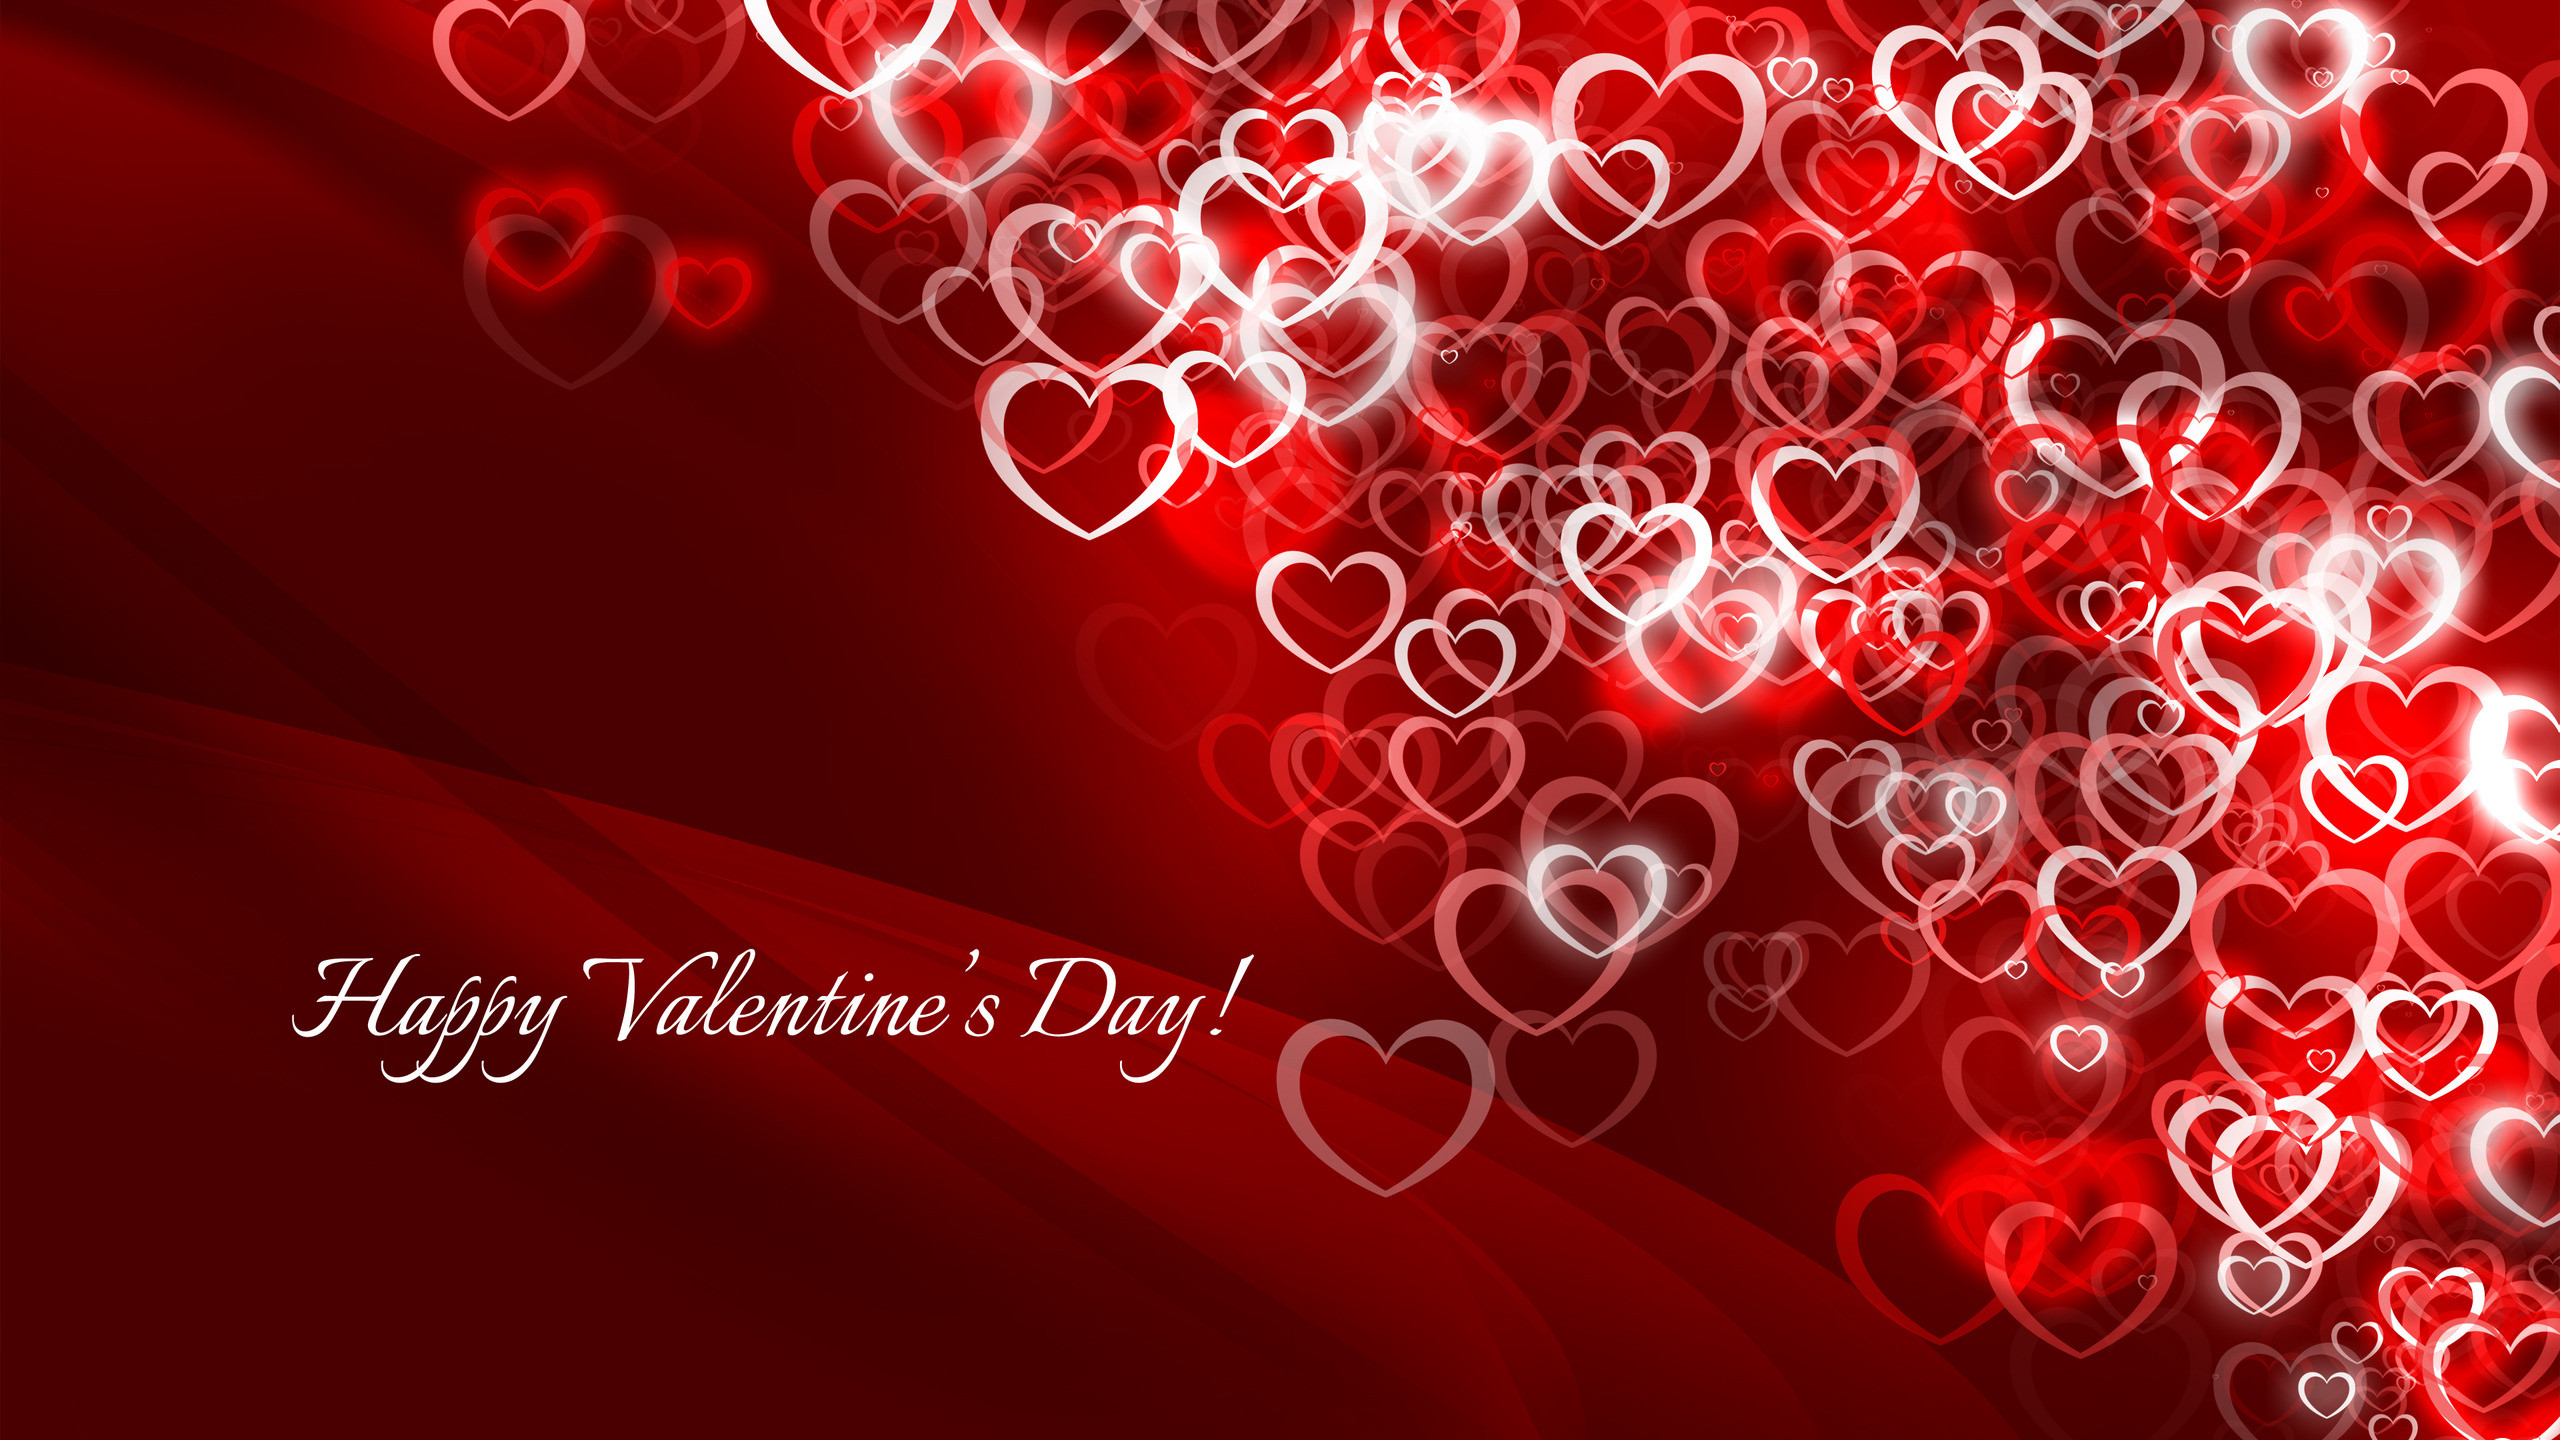 Heart Valentines Day Wallpaper for Chromebook  Valentine day gifts  Valentines Valentine day love